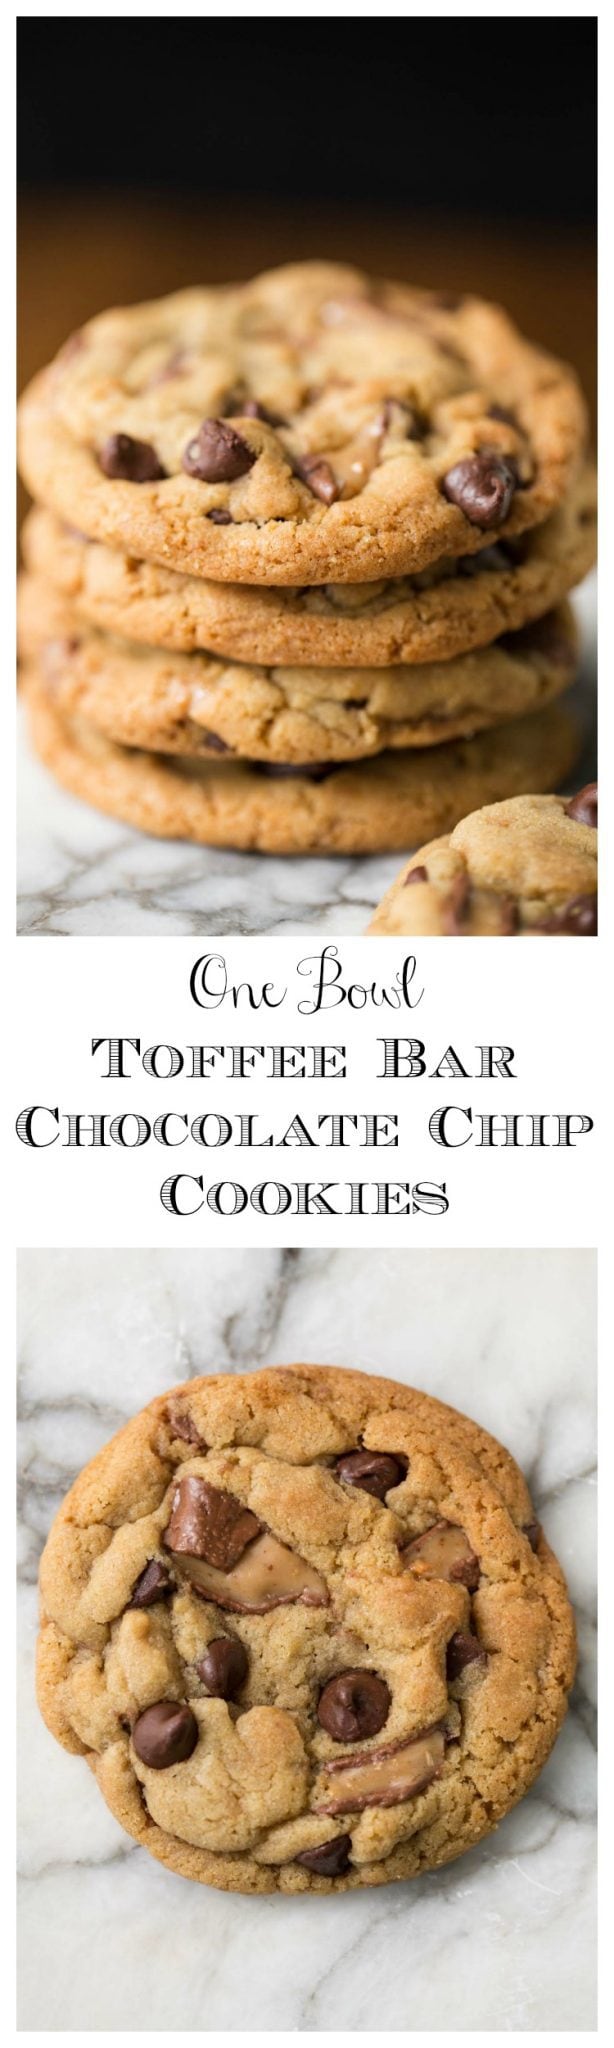 One Bowl Chocolate Chip Cookies - think one-bowl, no-mixer, super-easy, crazy-delicious cookies that look and taste like they came right from a fine bake shop are impossible? Nope, check it out!